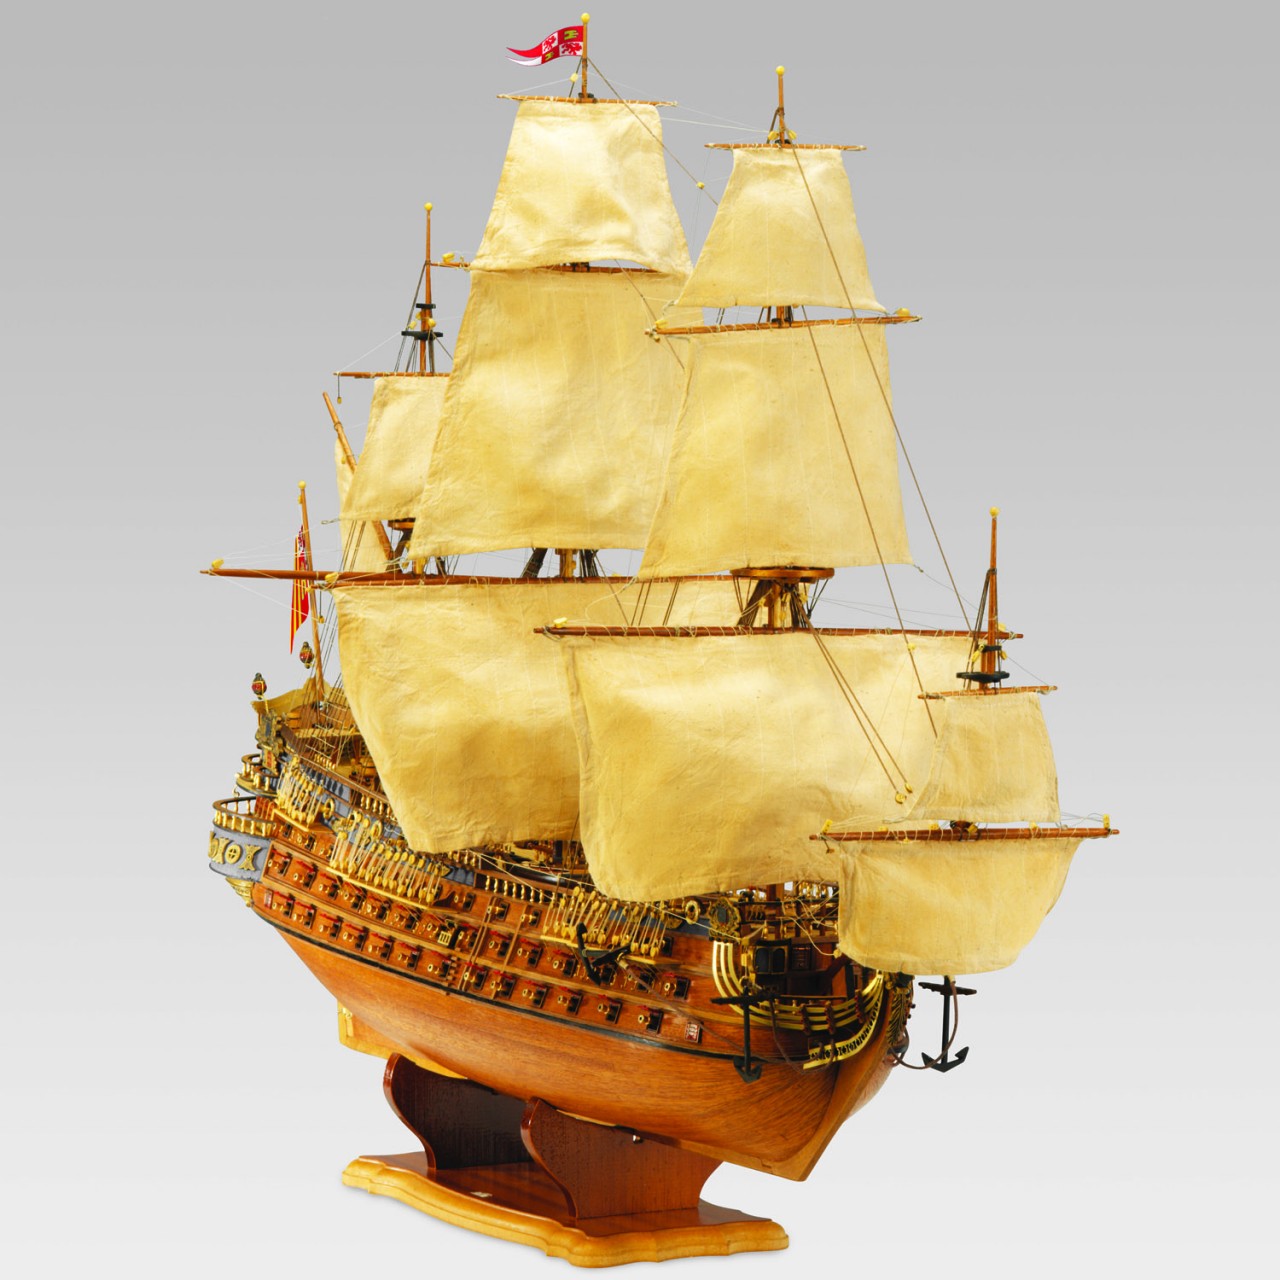 Image of the DeAgostini ModelSpace San Felipe scale model ship, as part of a blog about the San Felipe ship and its history.